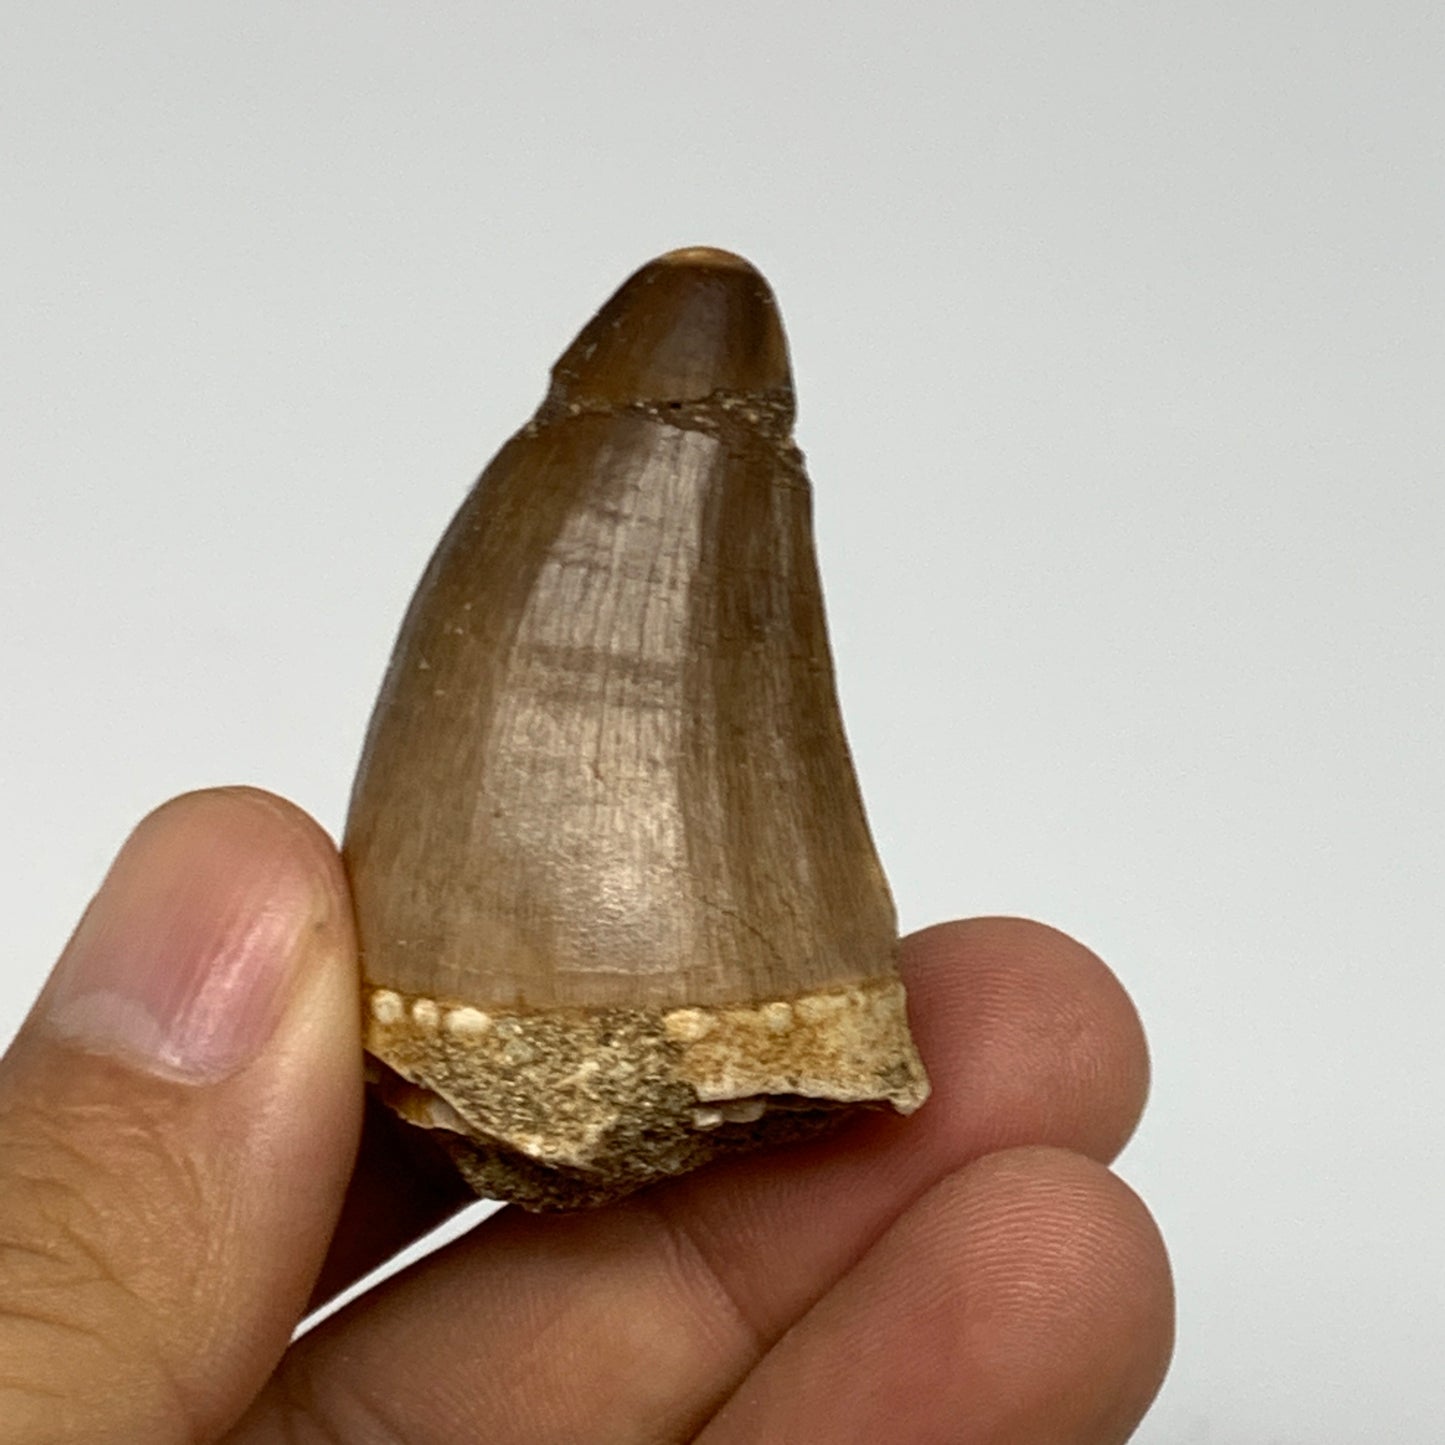 20.5g, 1.9"X1.1"x0.9" Fossil Mosasaur Tooth reptiles, Cretaceous @Morocco, B2375